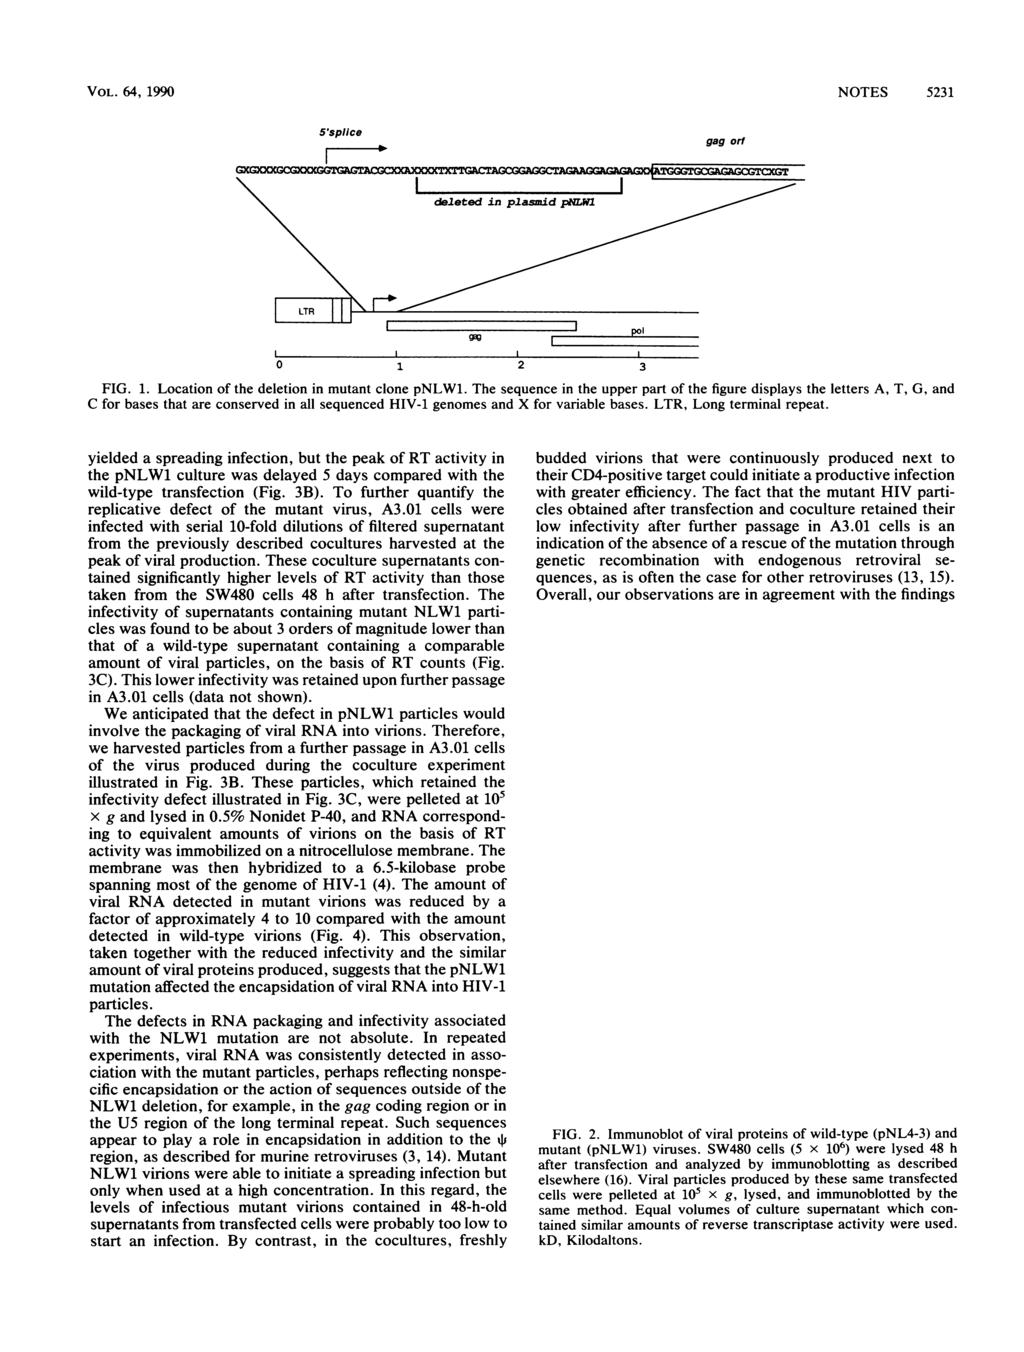 VOL. 64, 1990 NOTES 5231 5'splice gag orf 0 1-1 -1 J,, ^ --- ~~poi 2 3 FIG. 1. Location of the deletion in mutant clone pnlw1.